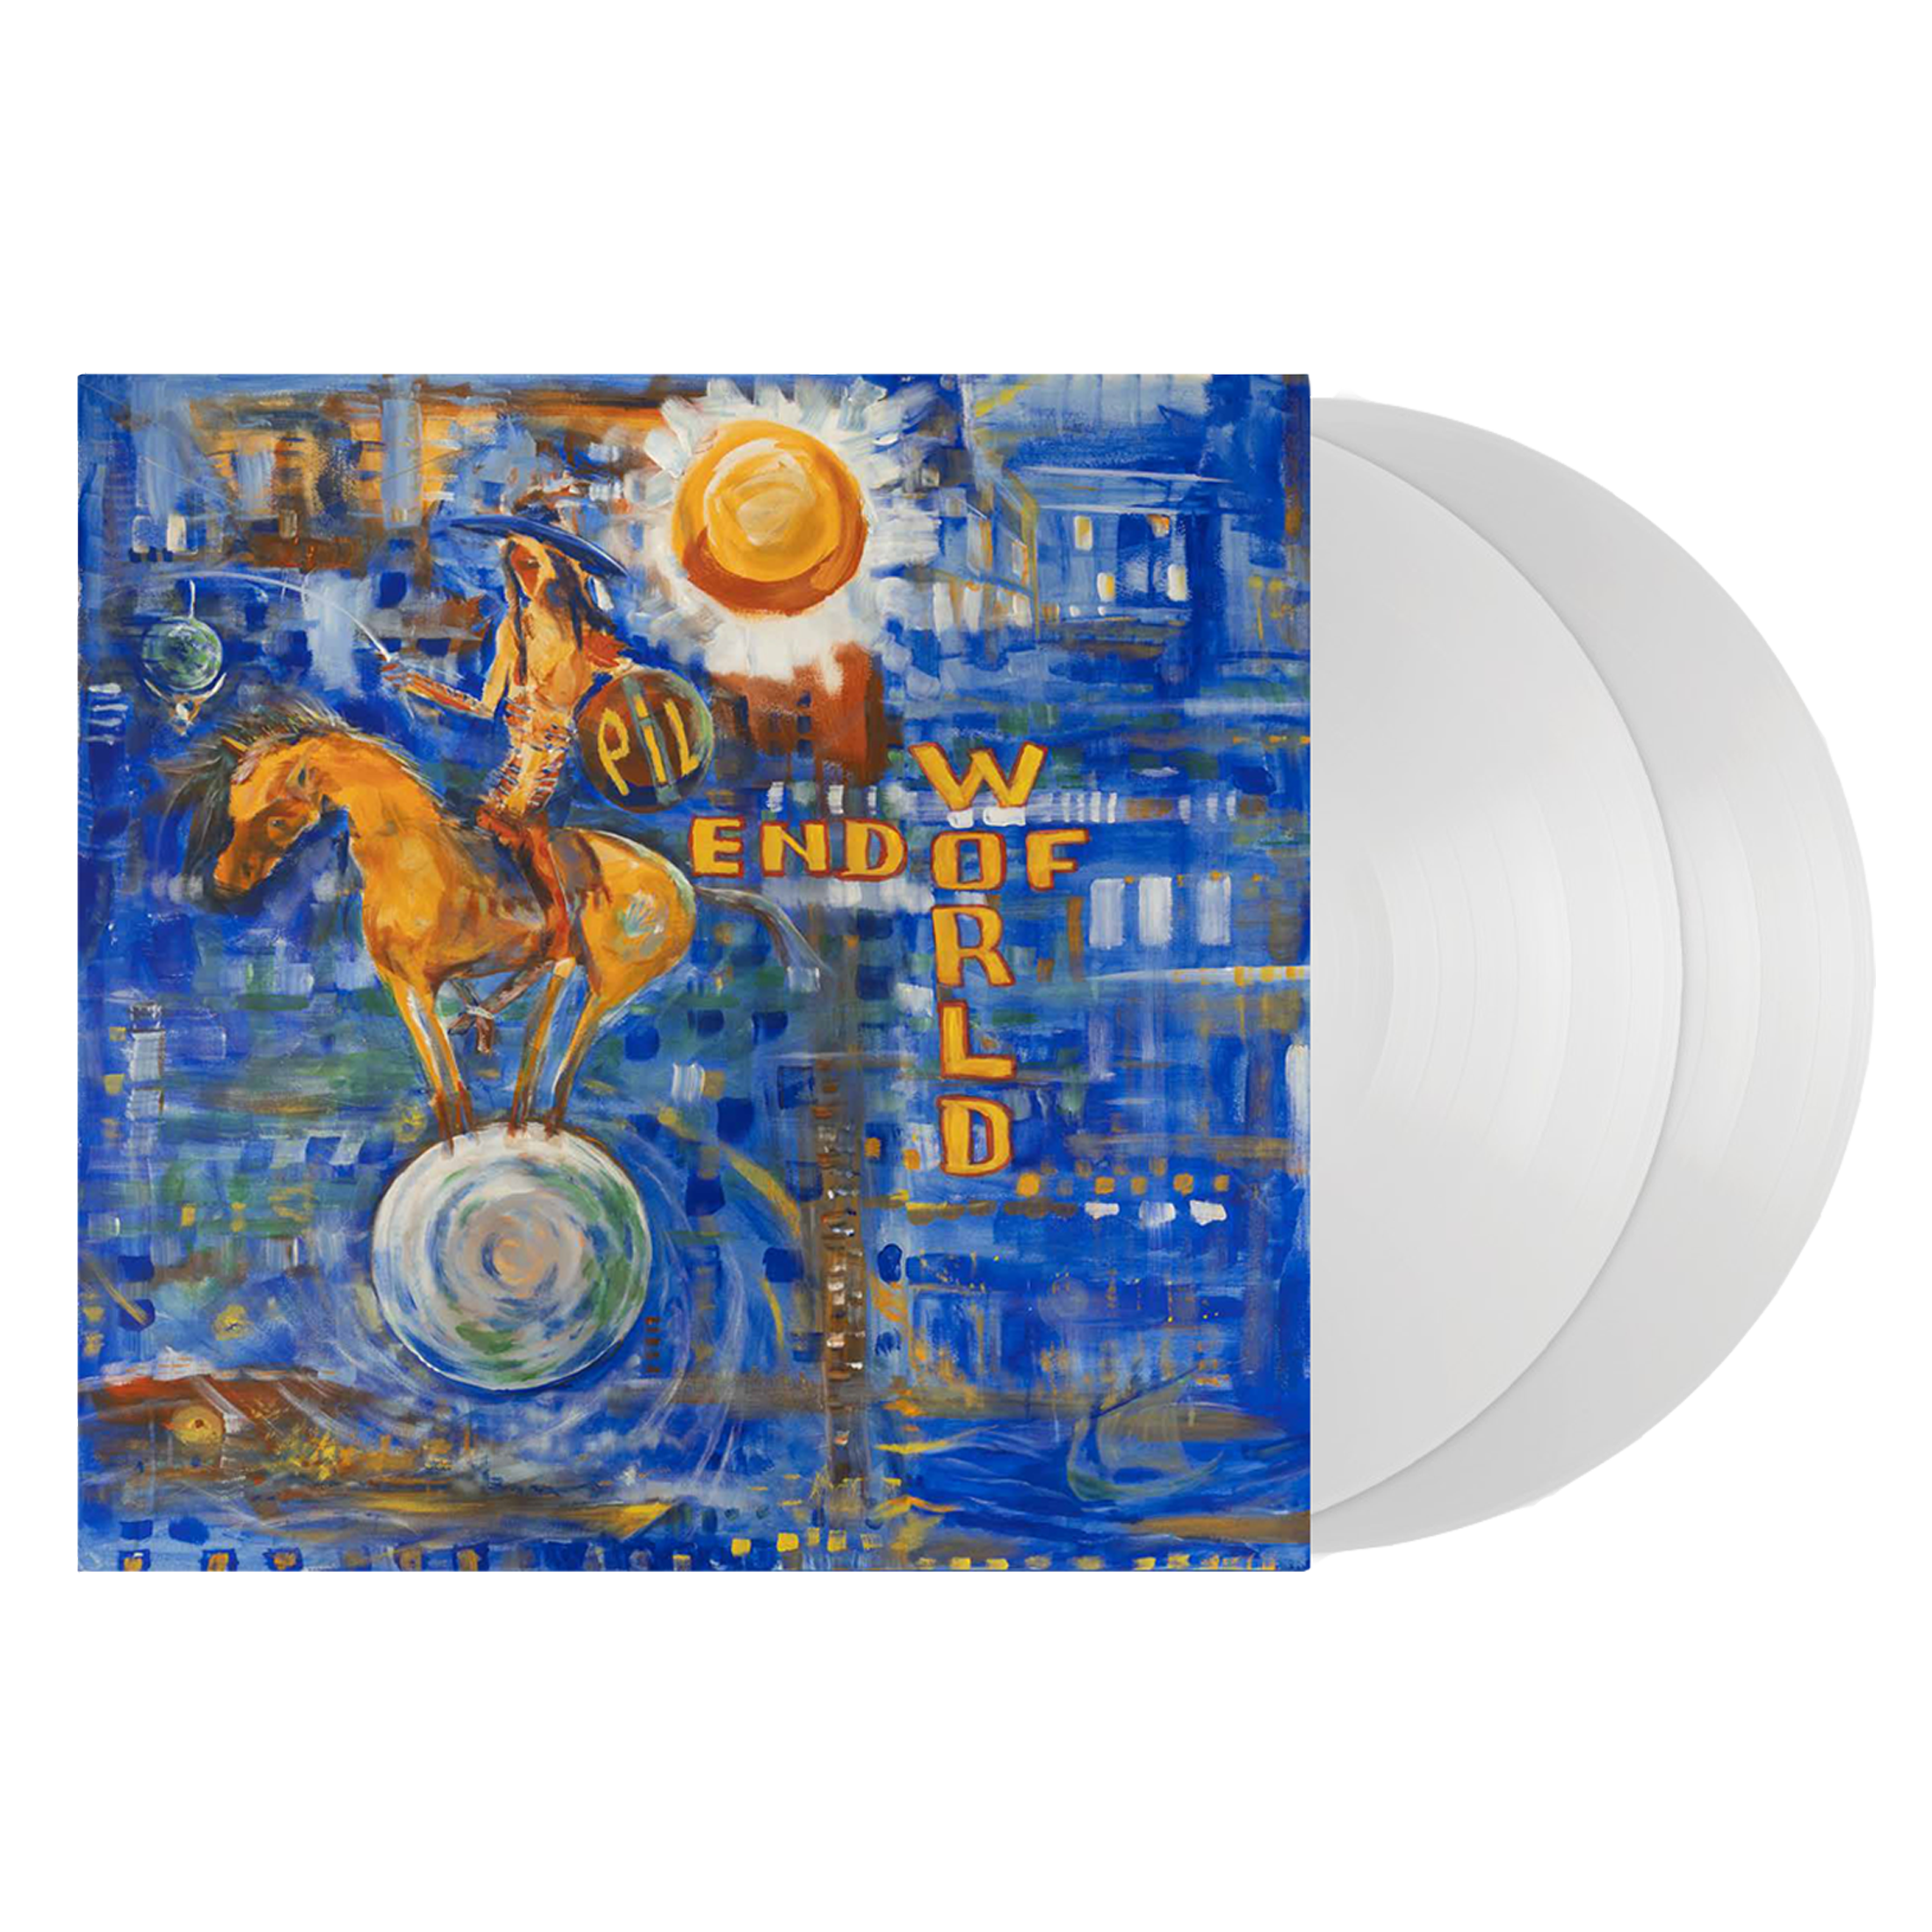 End Of World: Limited Solid White Vinyl 2LP + End of World Slipmat + End of World Tee I